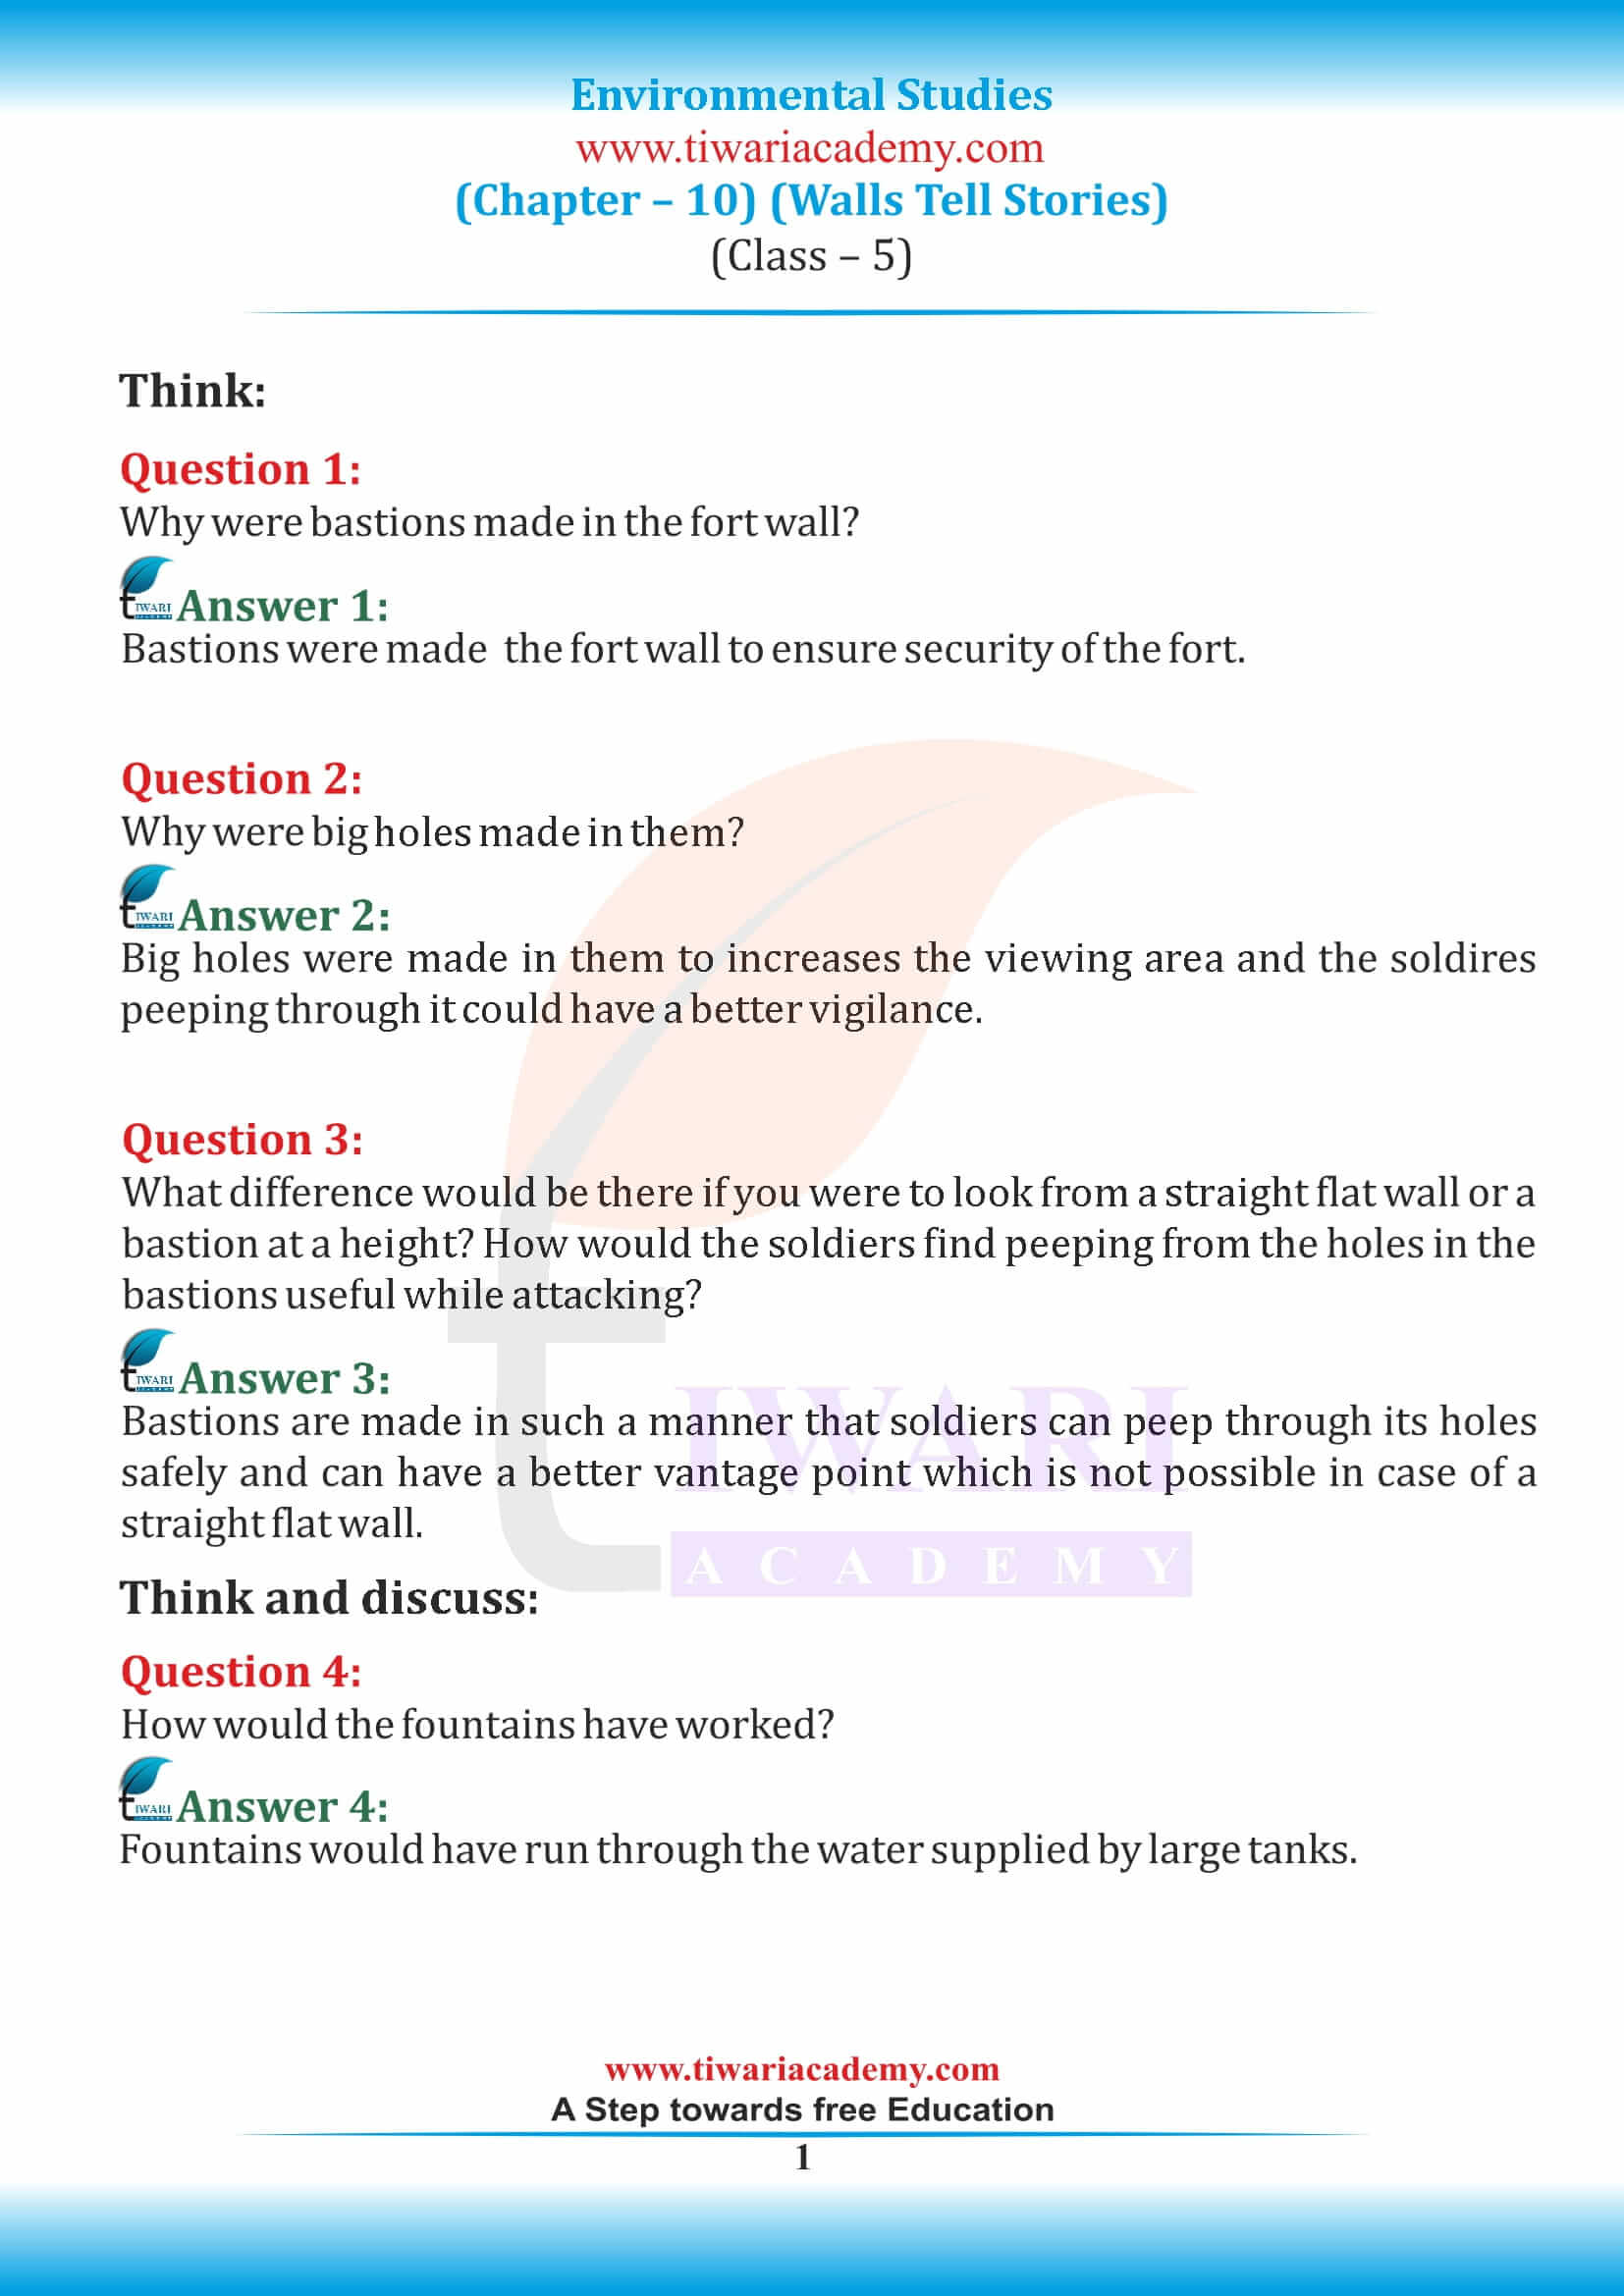 NCERT Solutions for Class 5 EVS Chapter 10 Walls Tell Stories